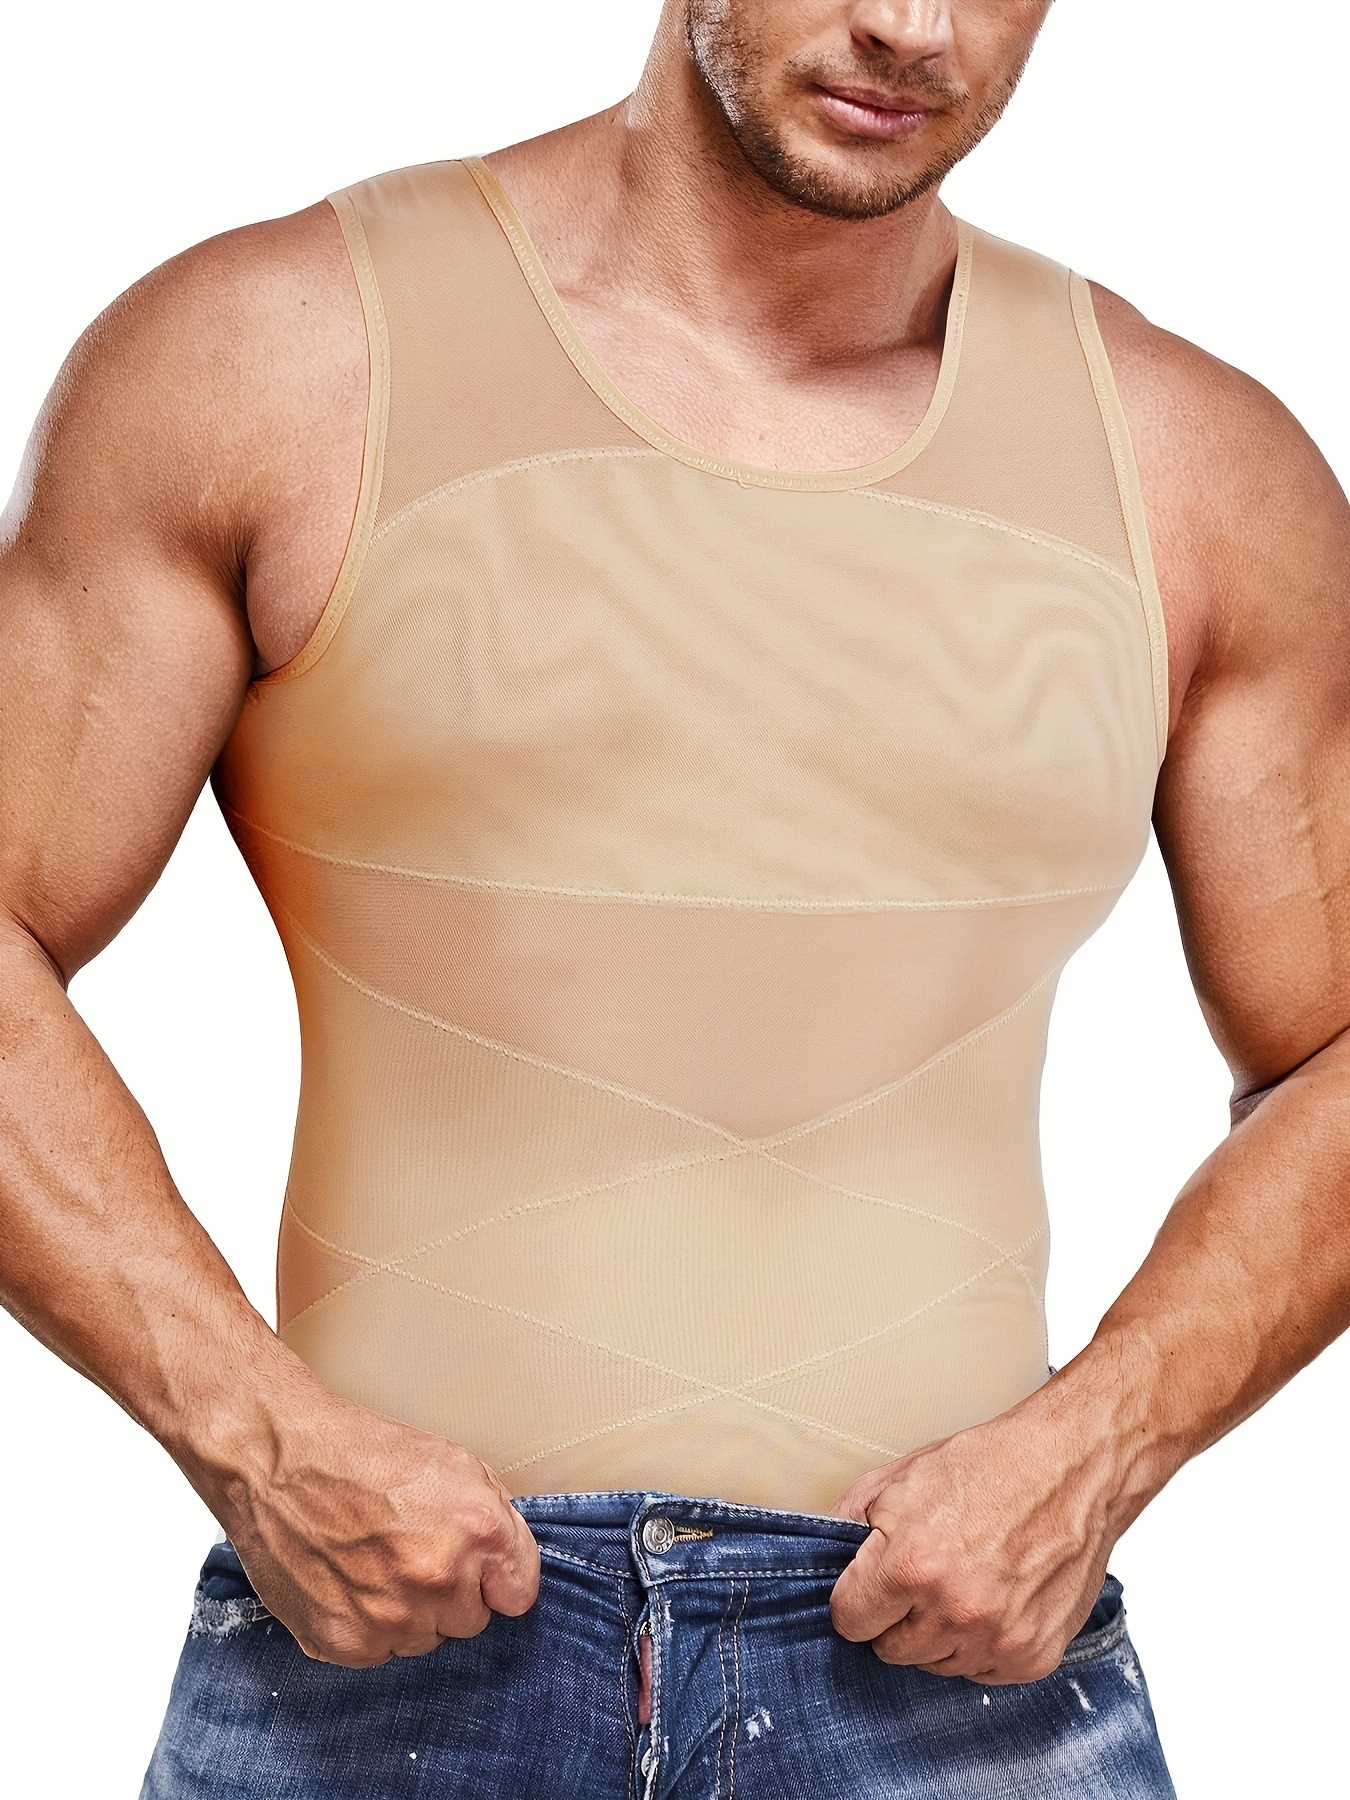 Leo Shapewear for Men - Compression Shirts, Waistline Slimmers, Body  Shapers from Topdrawers Menswear